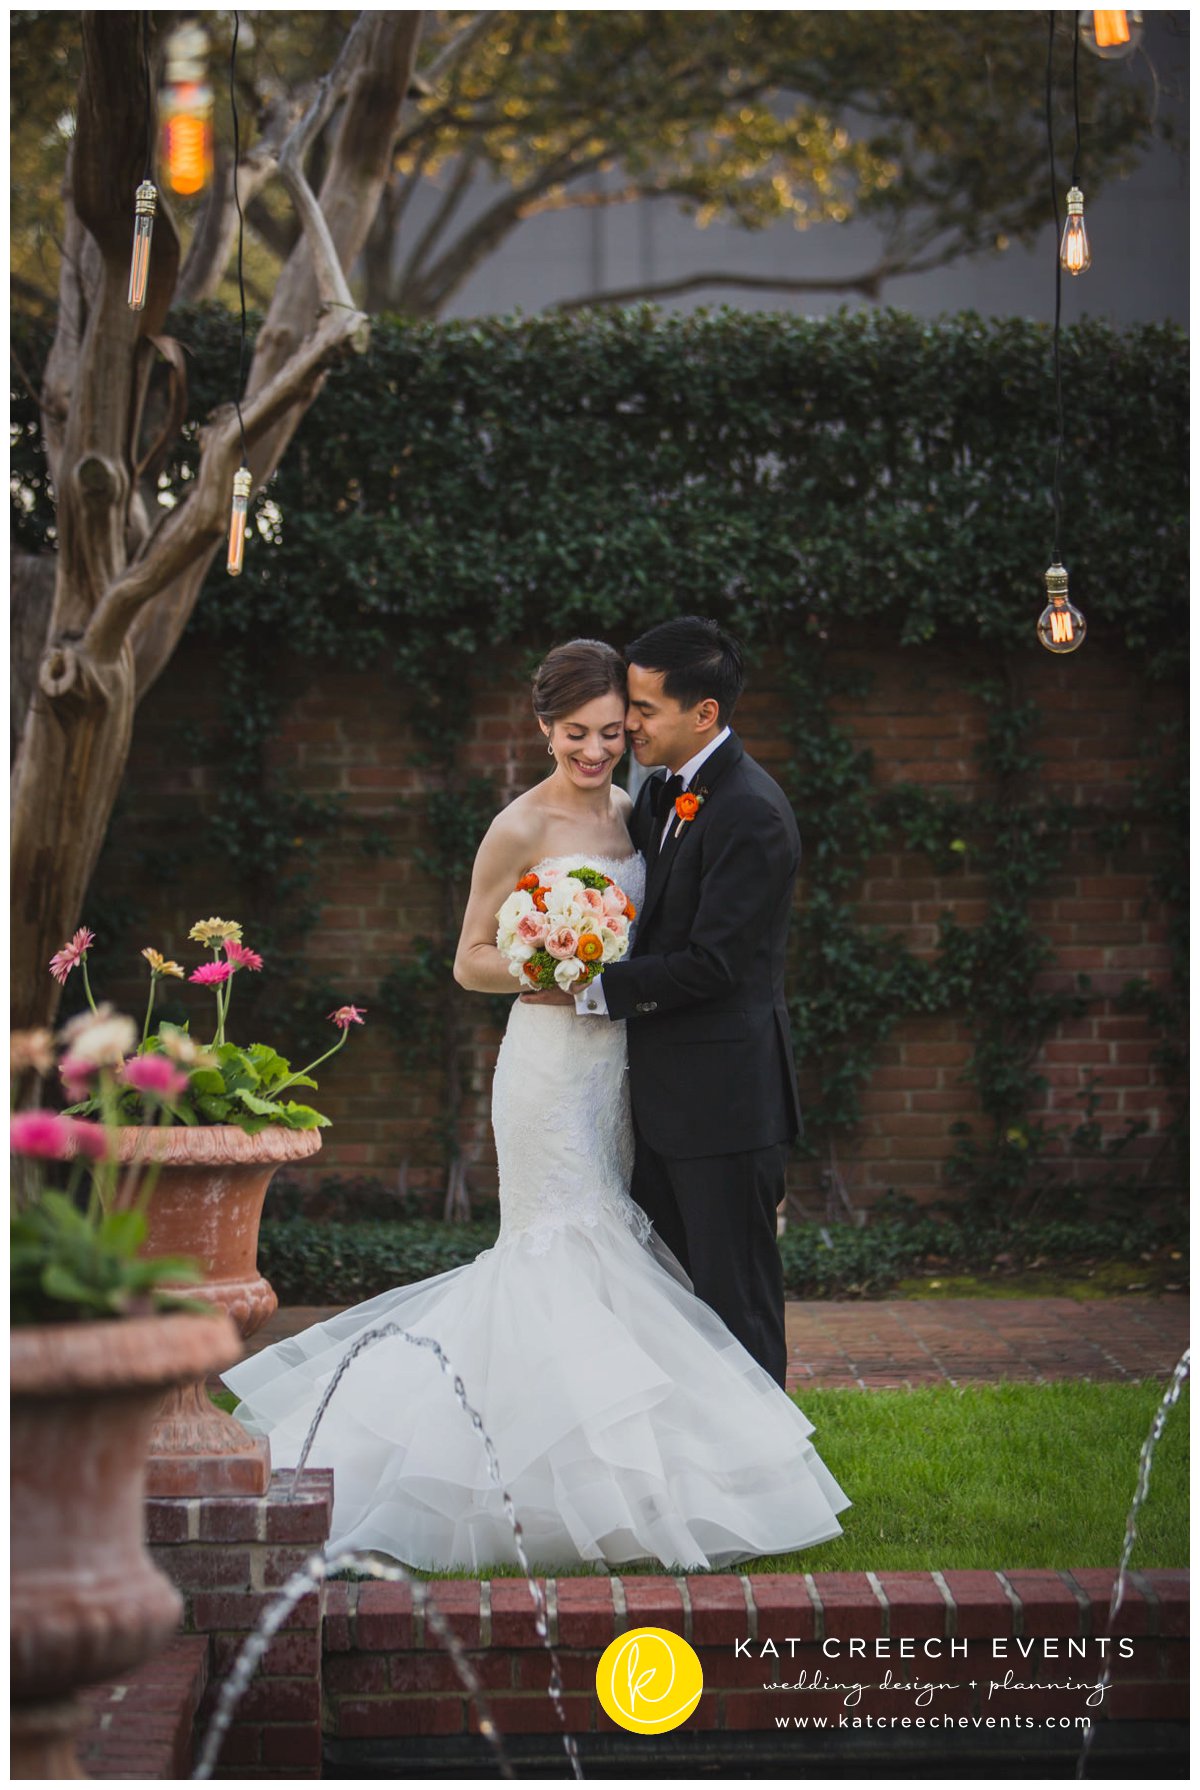 riven wedding gown | lace wedding gown | wedding style | Kat Creech Events